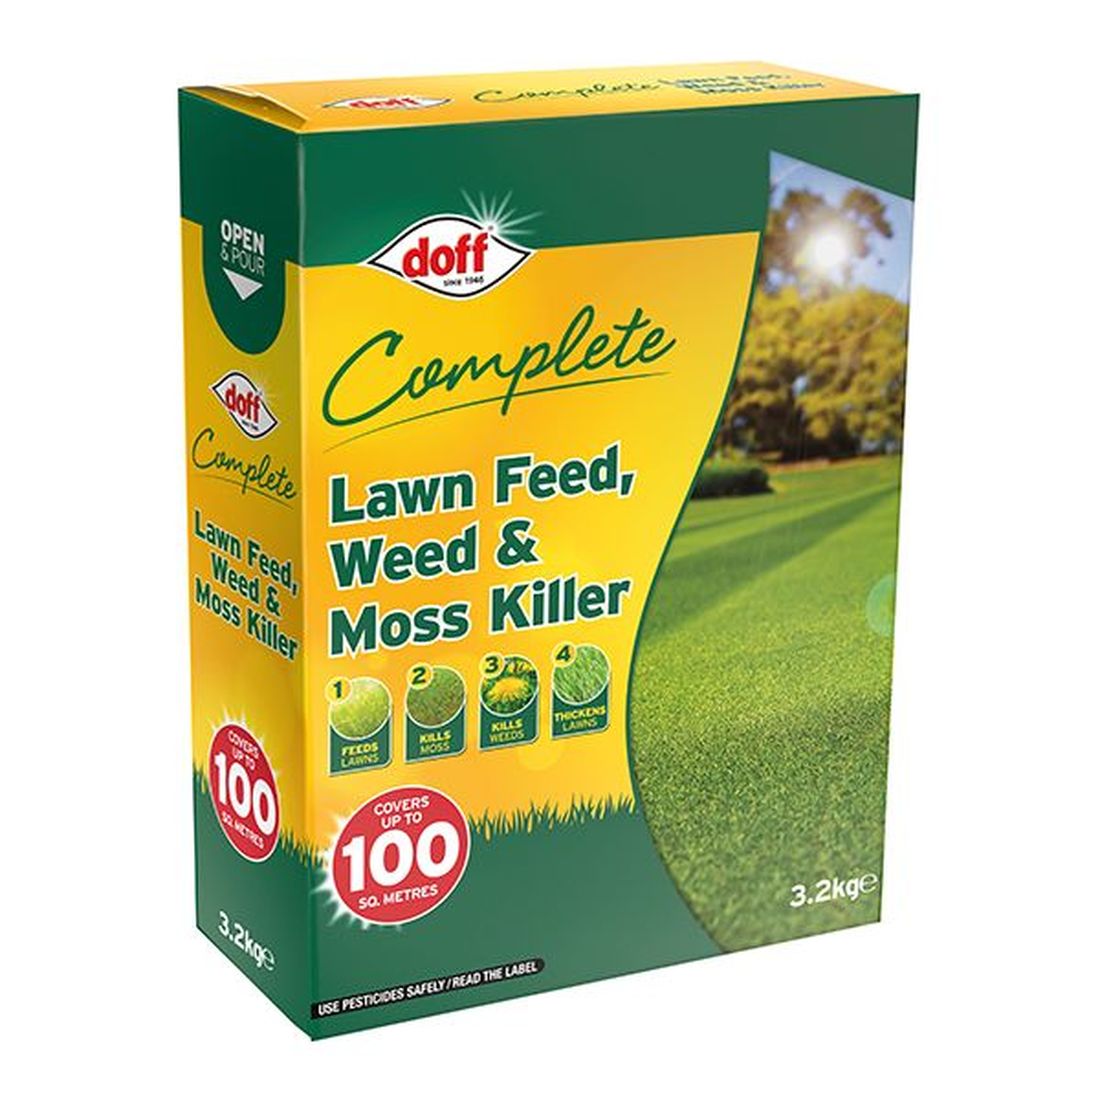 DOFF Complete Lawn Feed, Weed & Moss Killer 3.2kg                                    